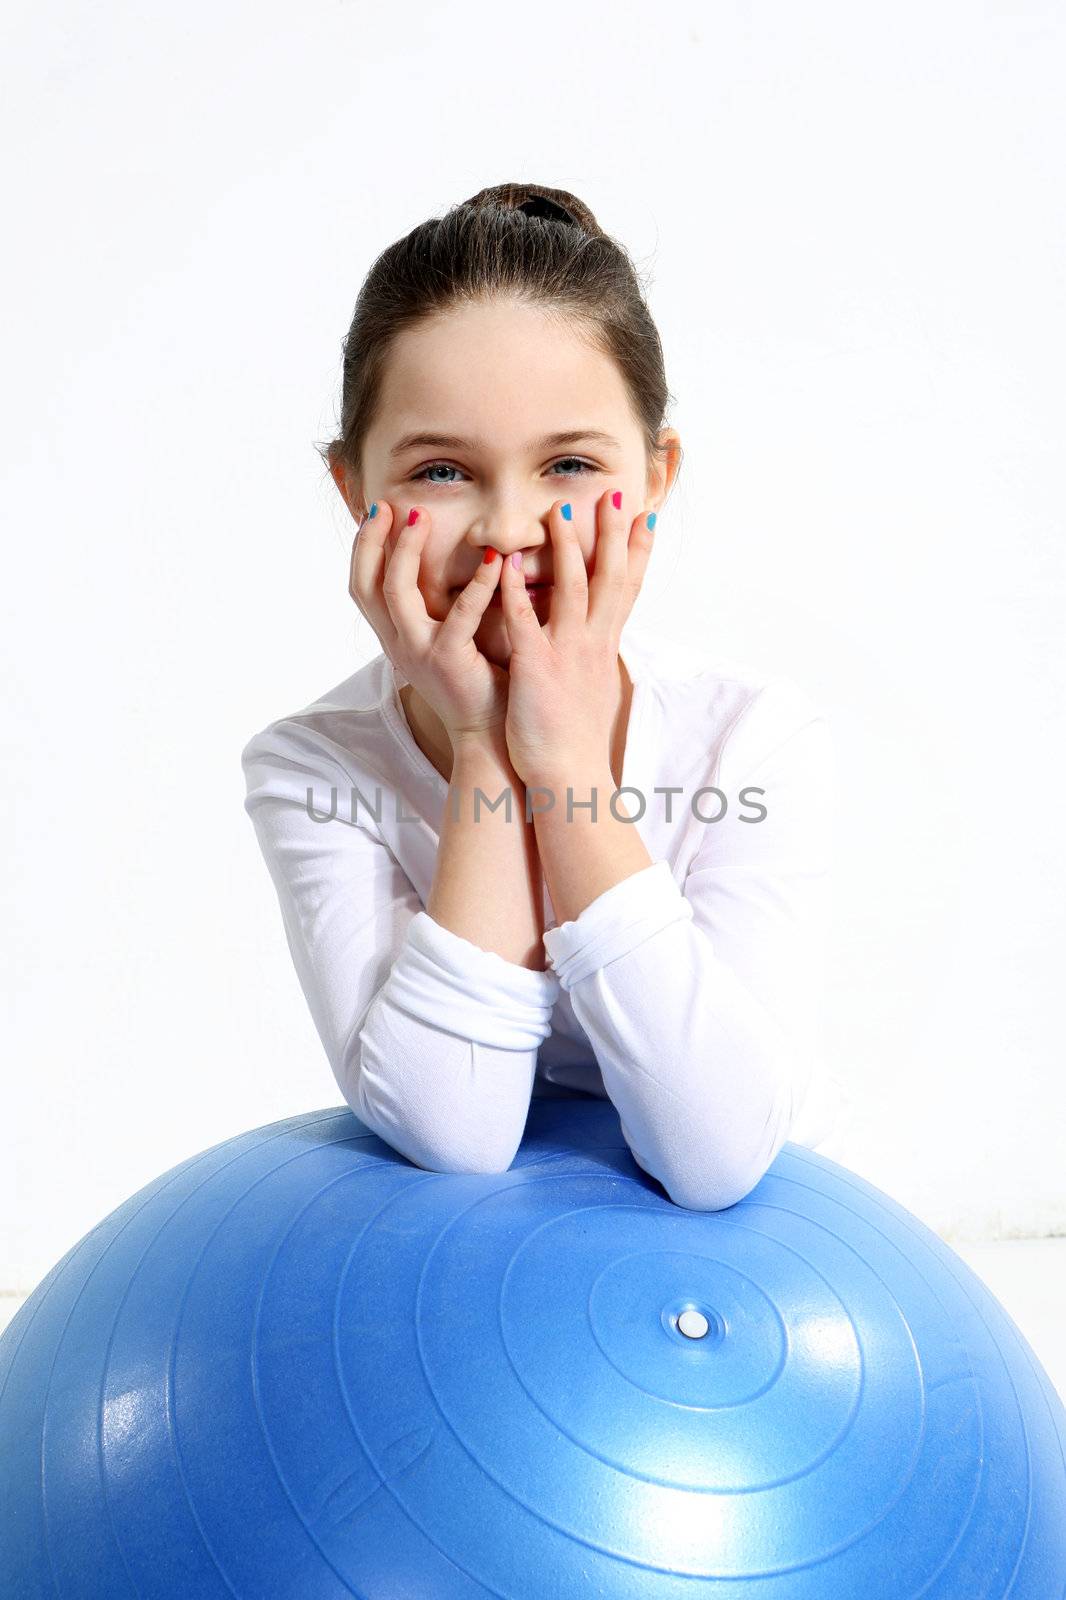 Portrait of little girl with a rubber ball